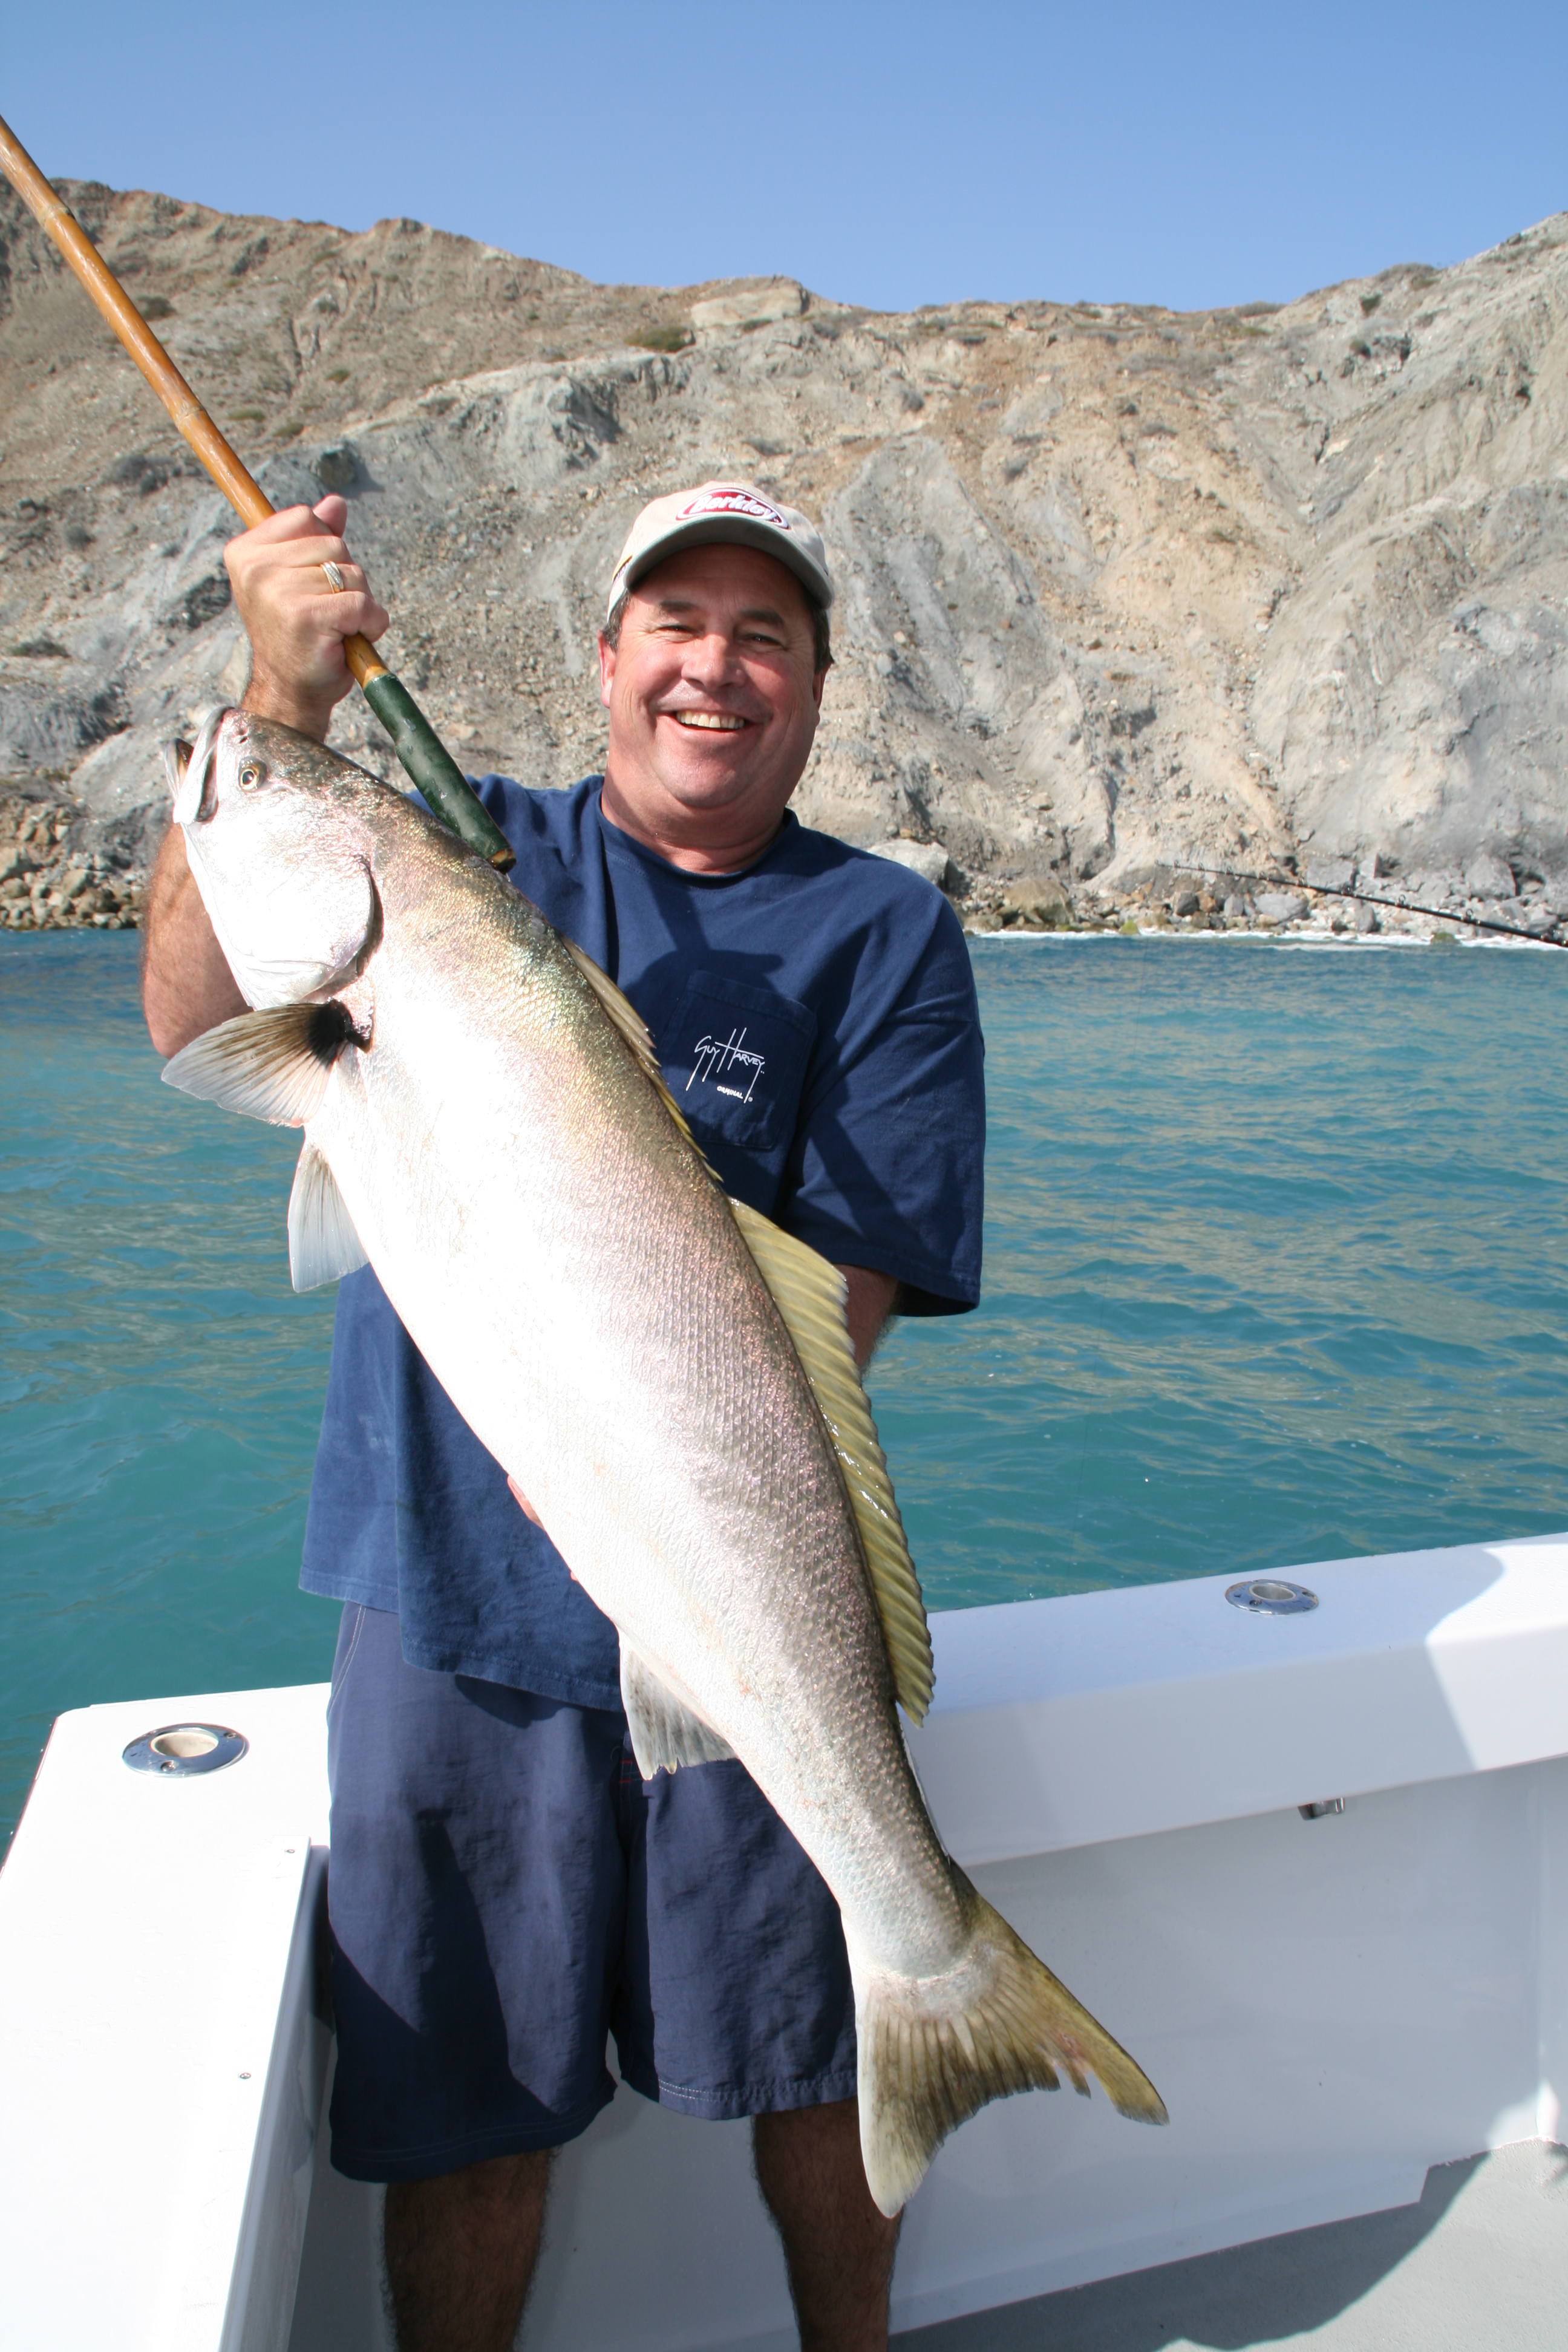 Sportfishing: Freshwater and Saltwater Fishing Jobs and Career Resources